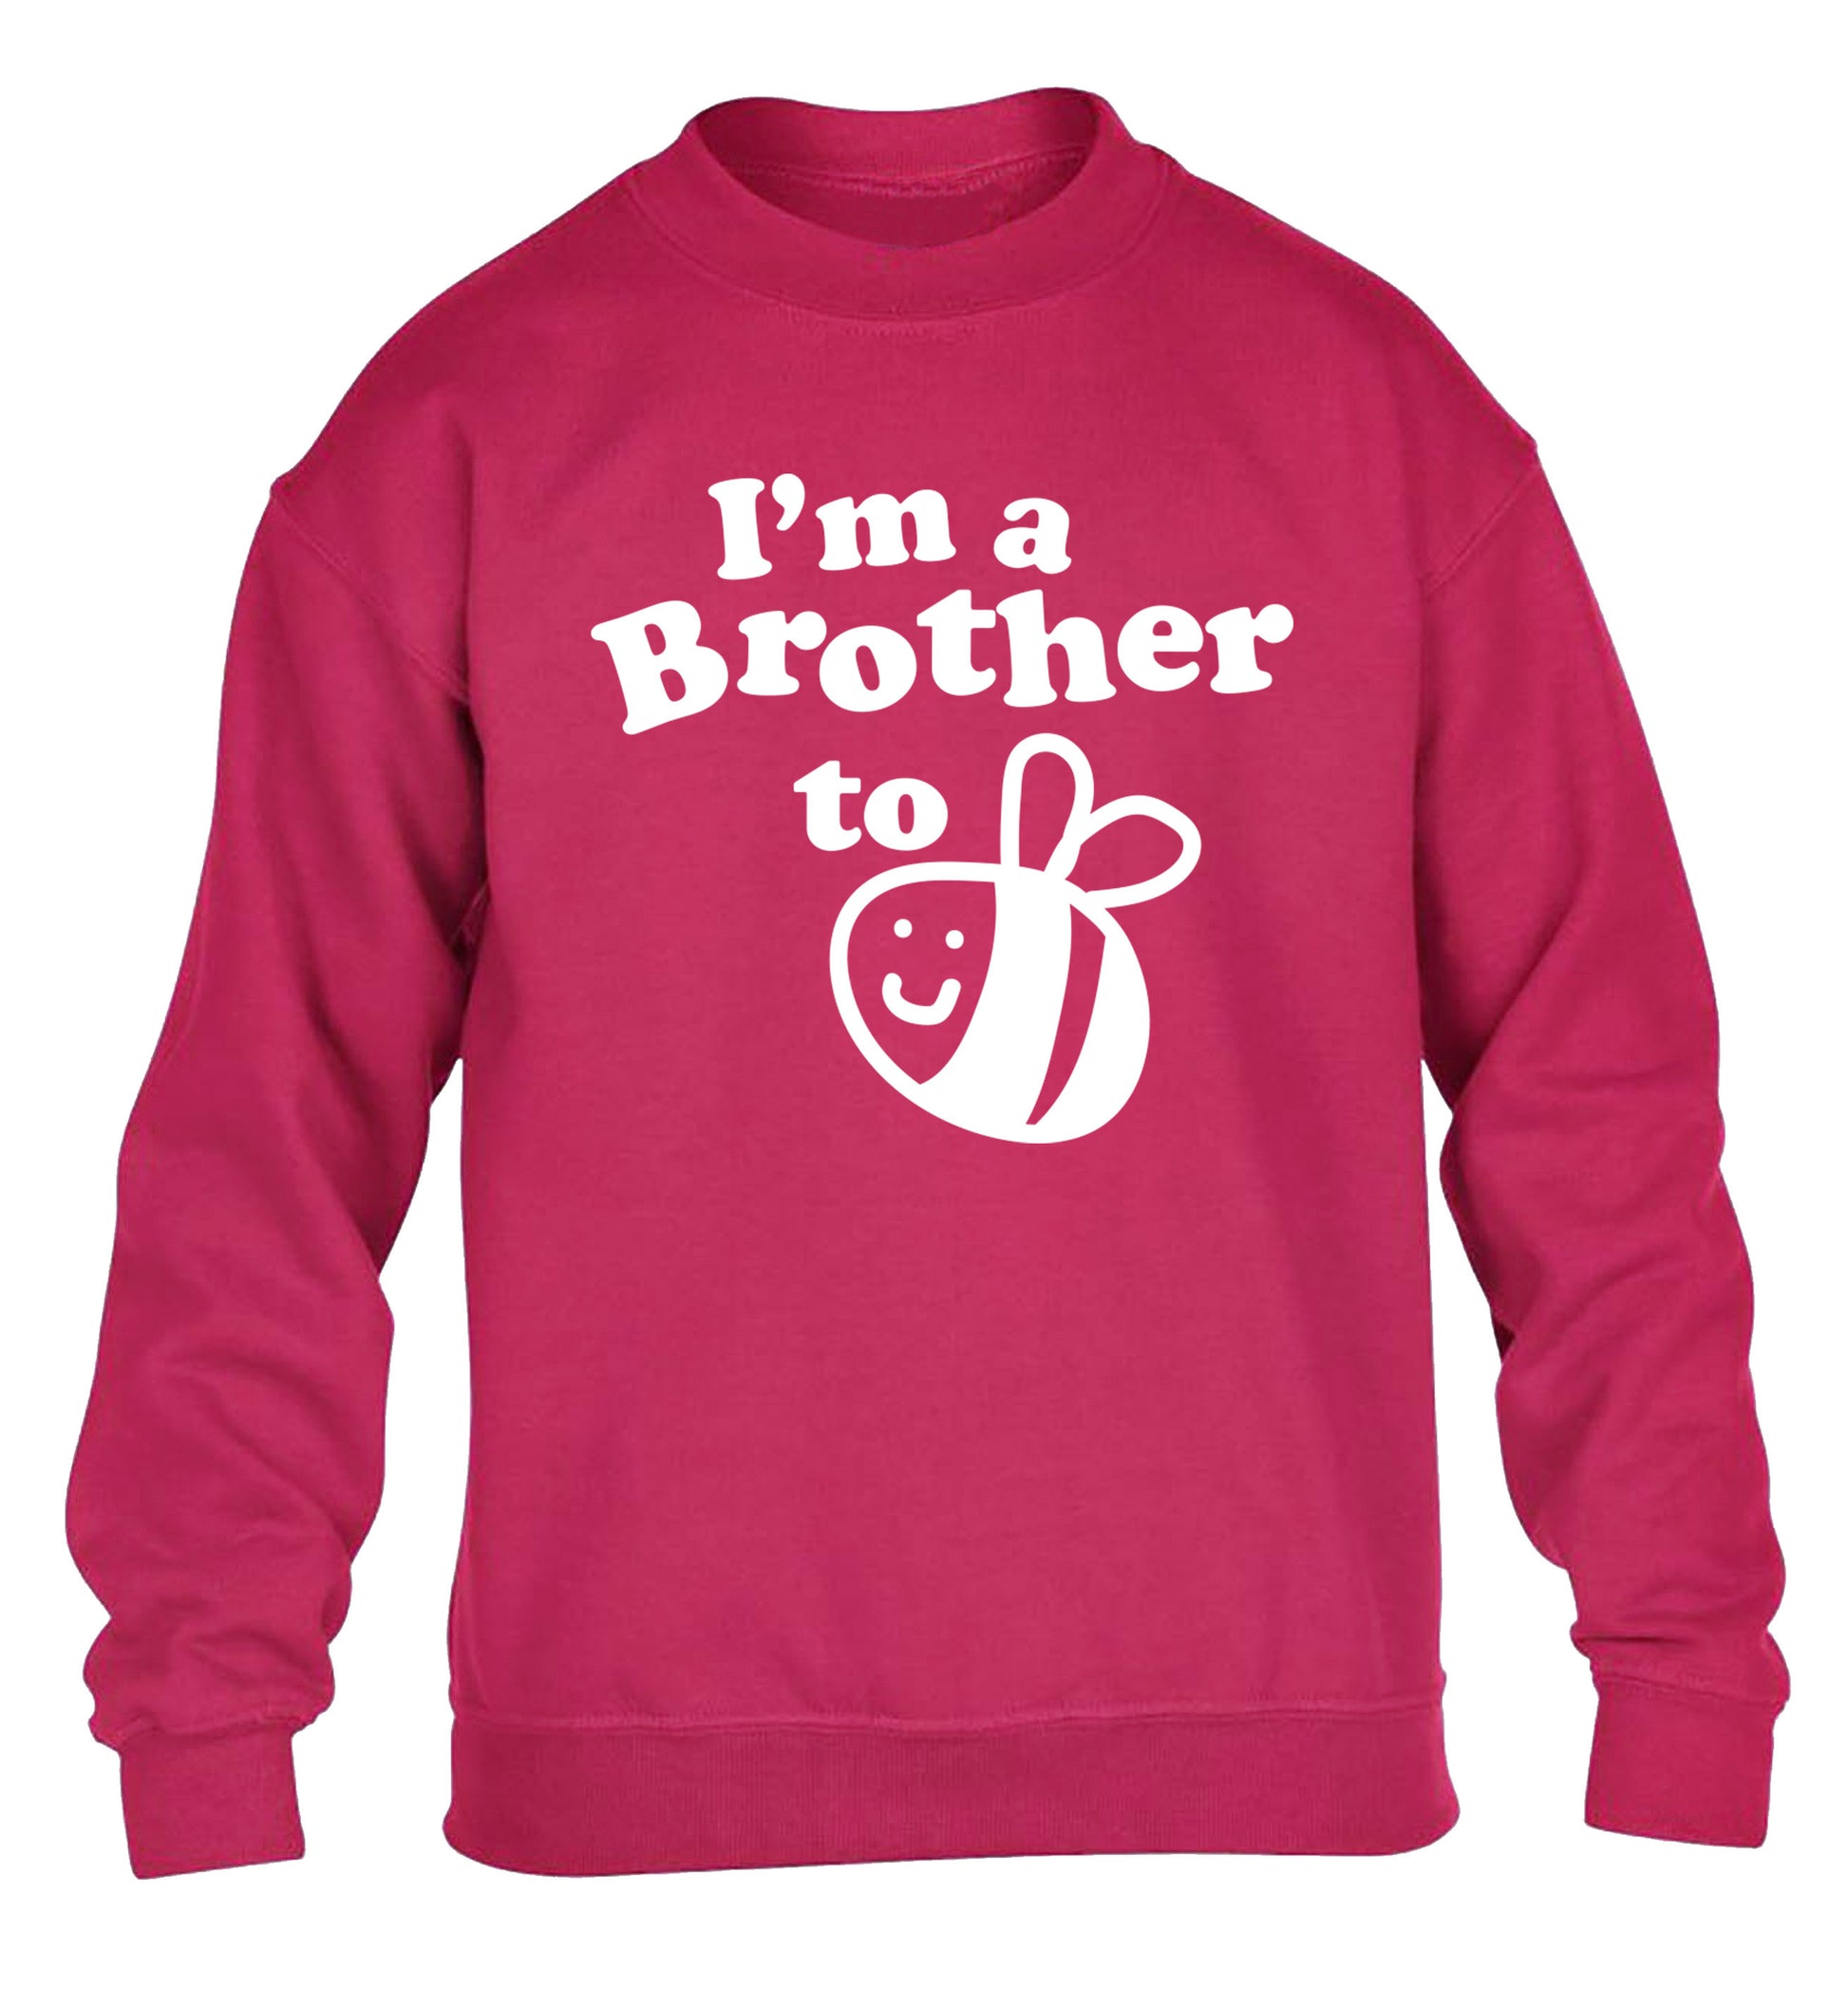 I'm a brother to be children's pink sweater 12-14 Years